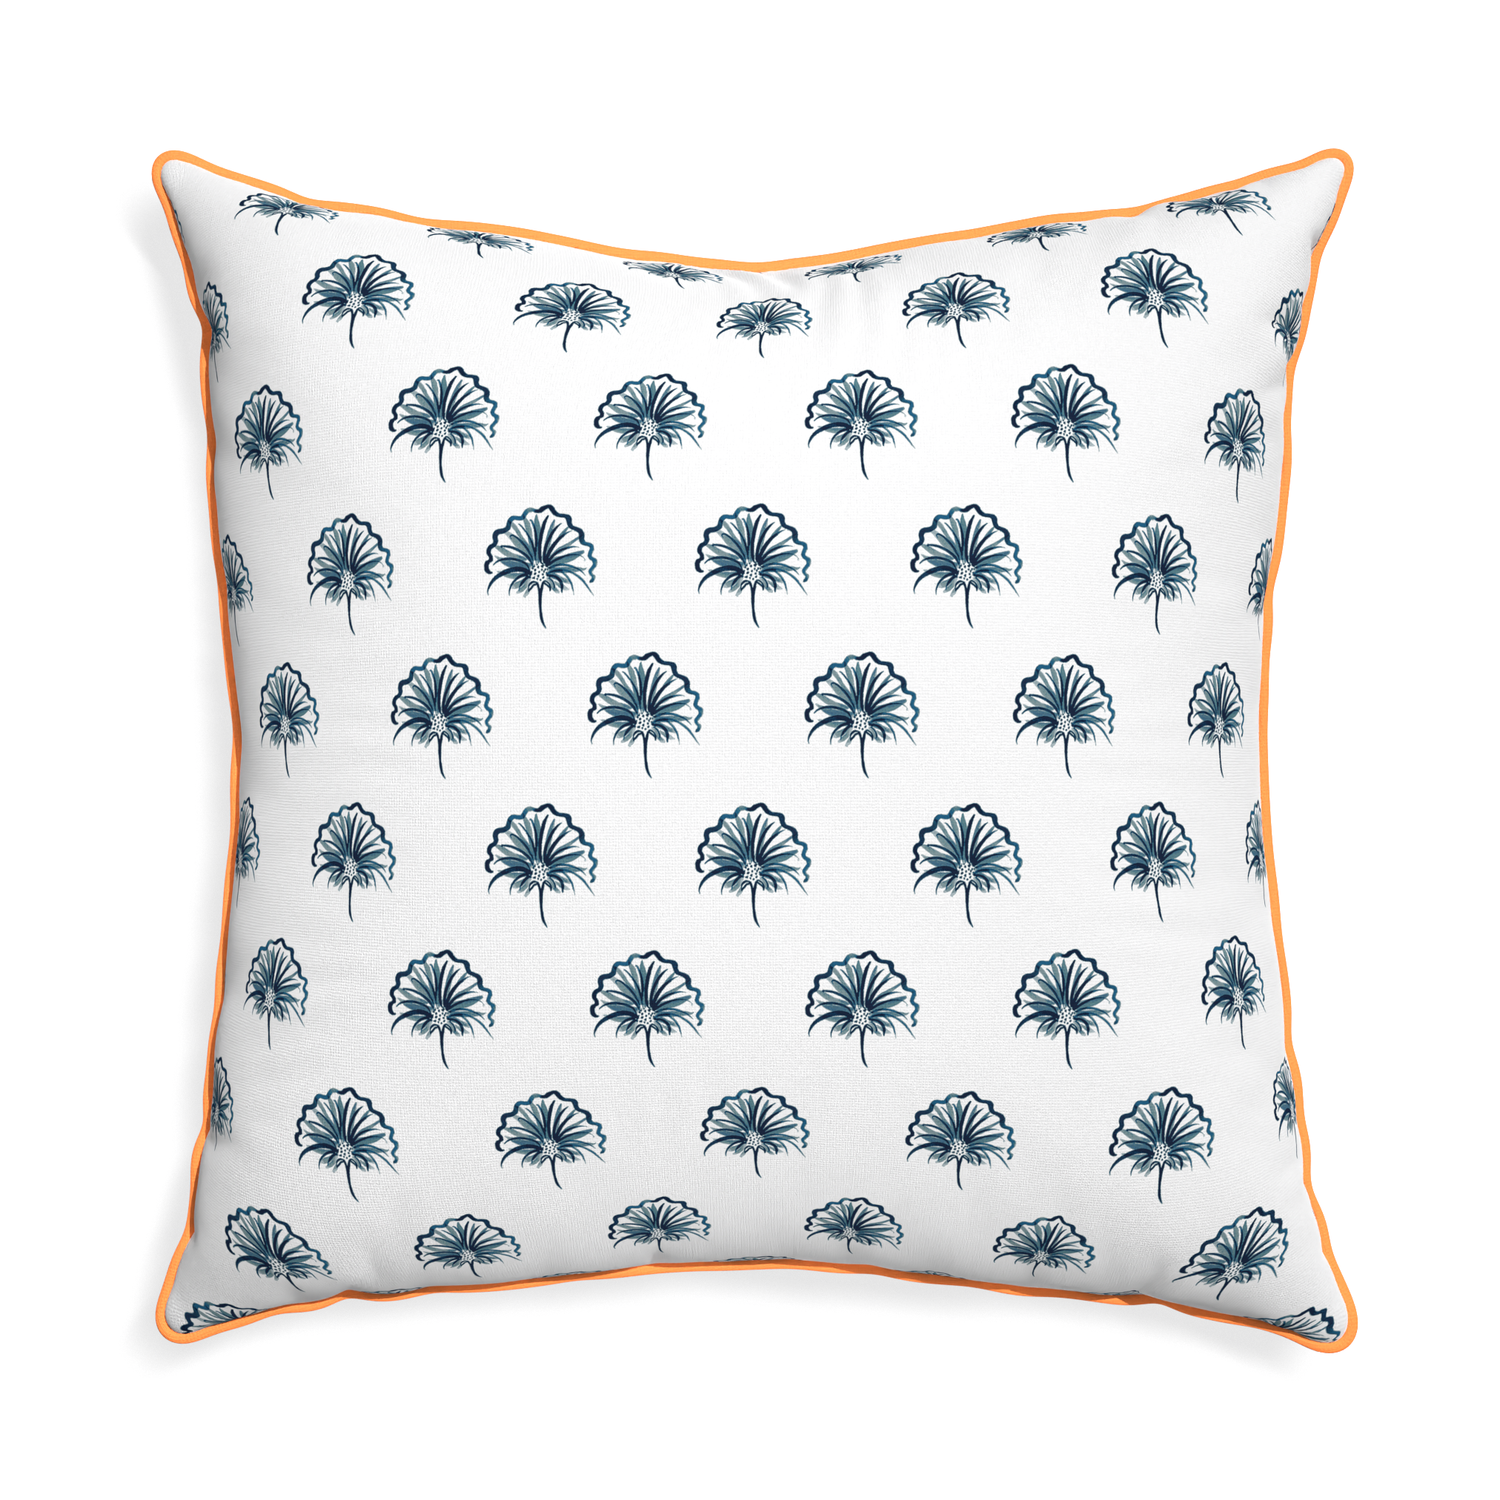 Euro-sham penelope midnight custom pillow with clementine piping on white background